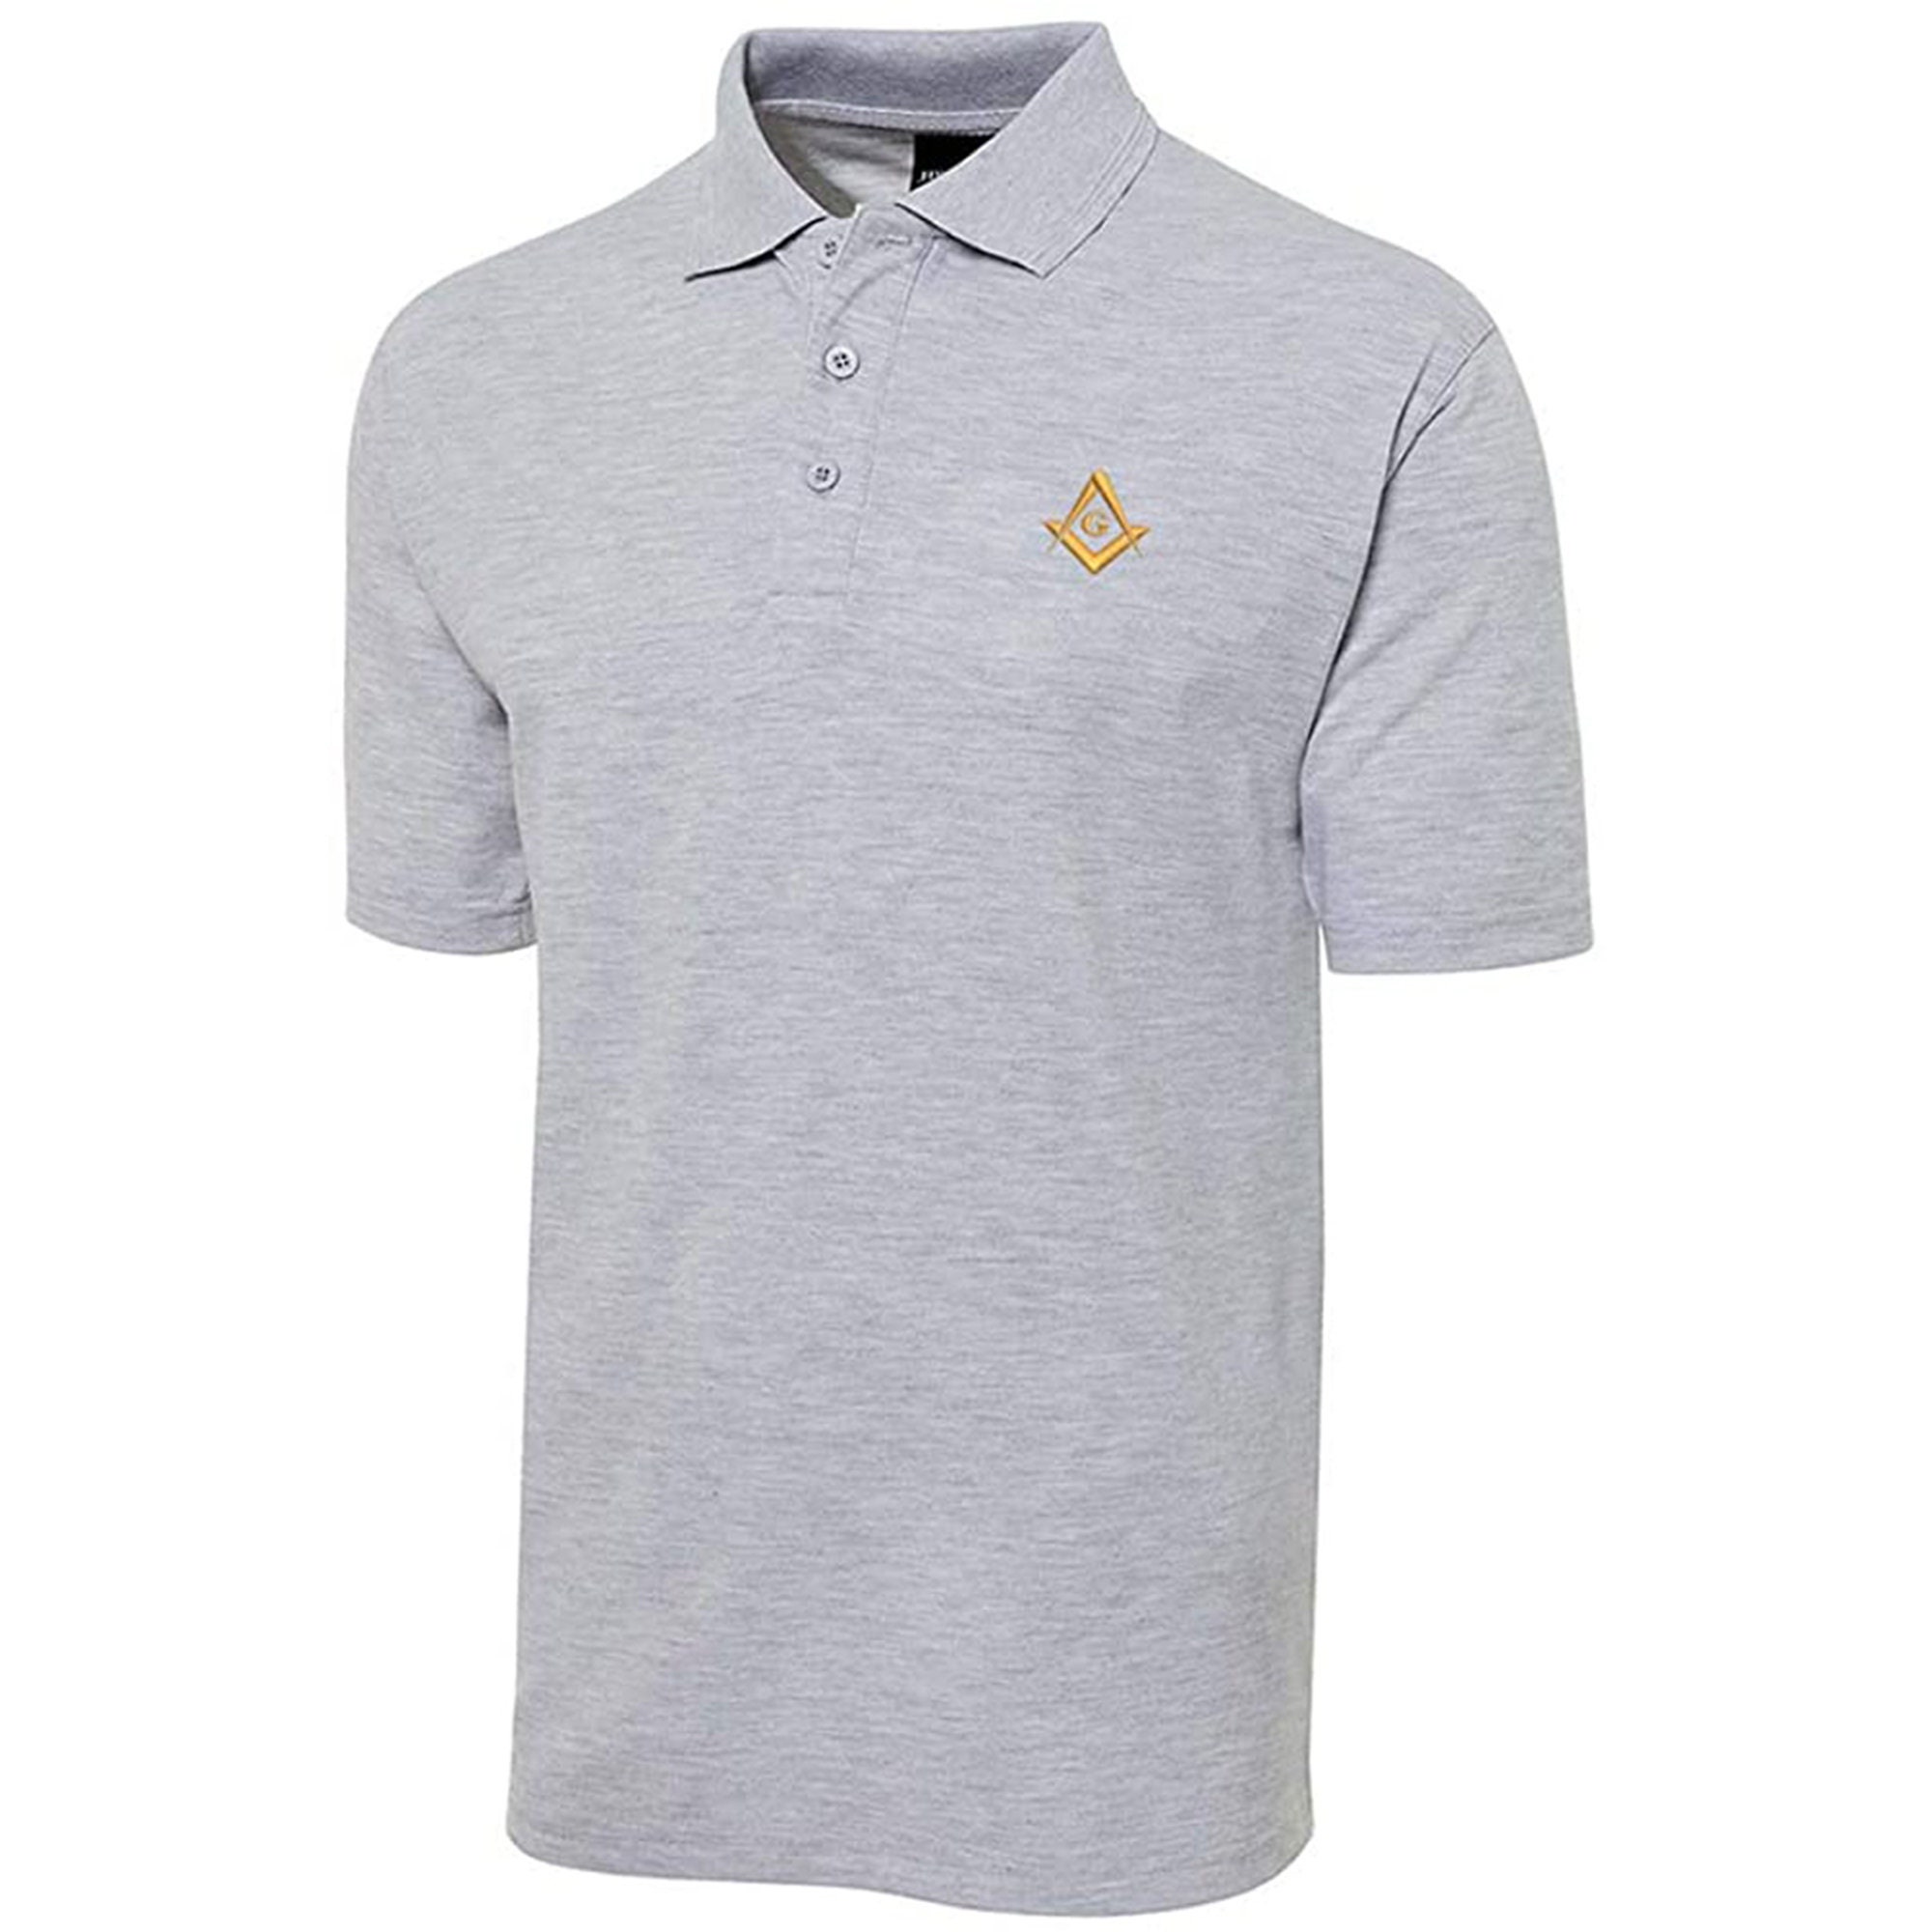 Masonic Lodge Embroidered Short Sleeve Polo Shirts Classic Embroidery Men's Polo Shirt